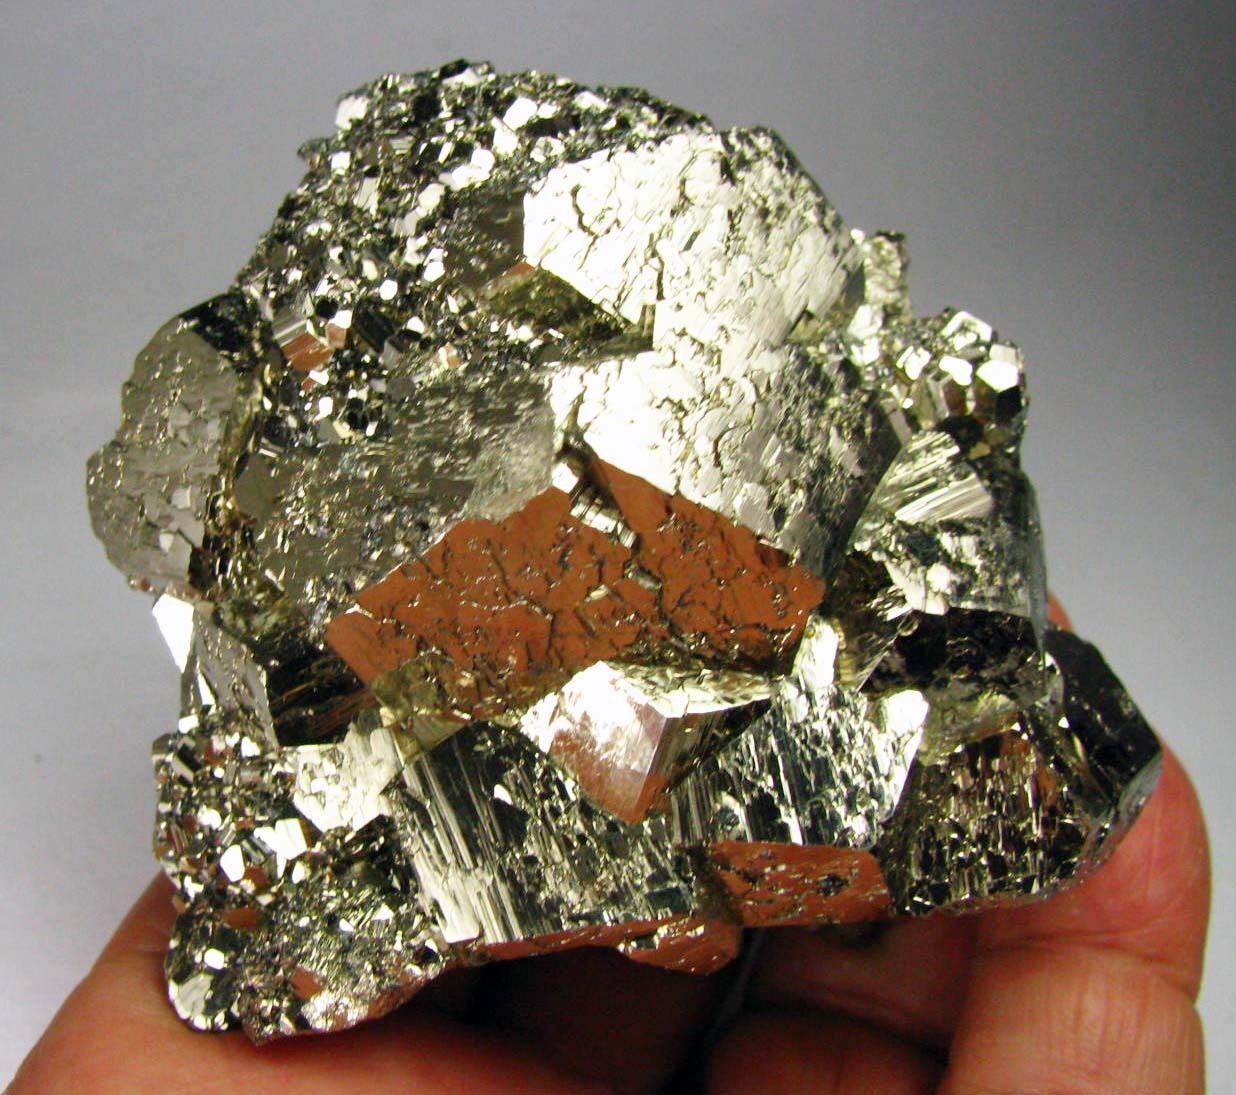 PYRITE PENTADODECAHEDRAL BRILLIANT BIG CRYSTALS from PERU...OUTSTANDING QUALITY 